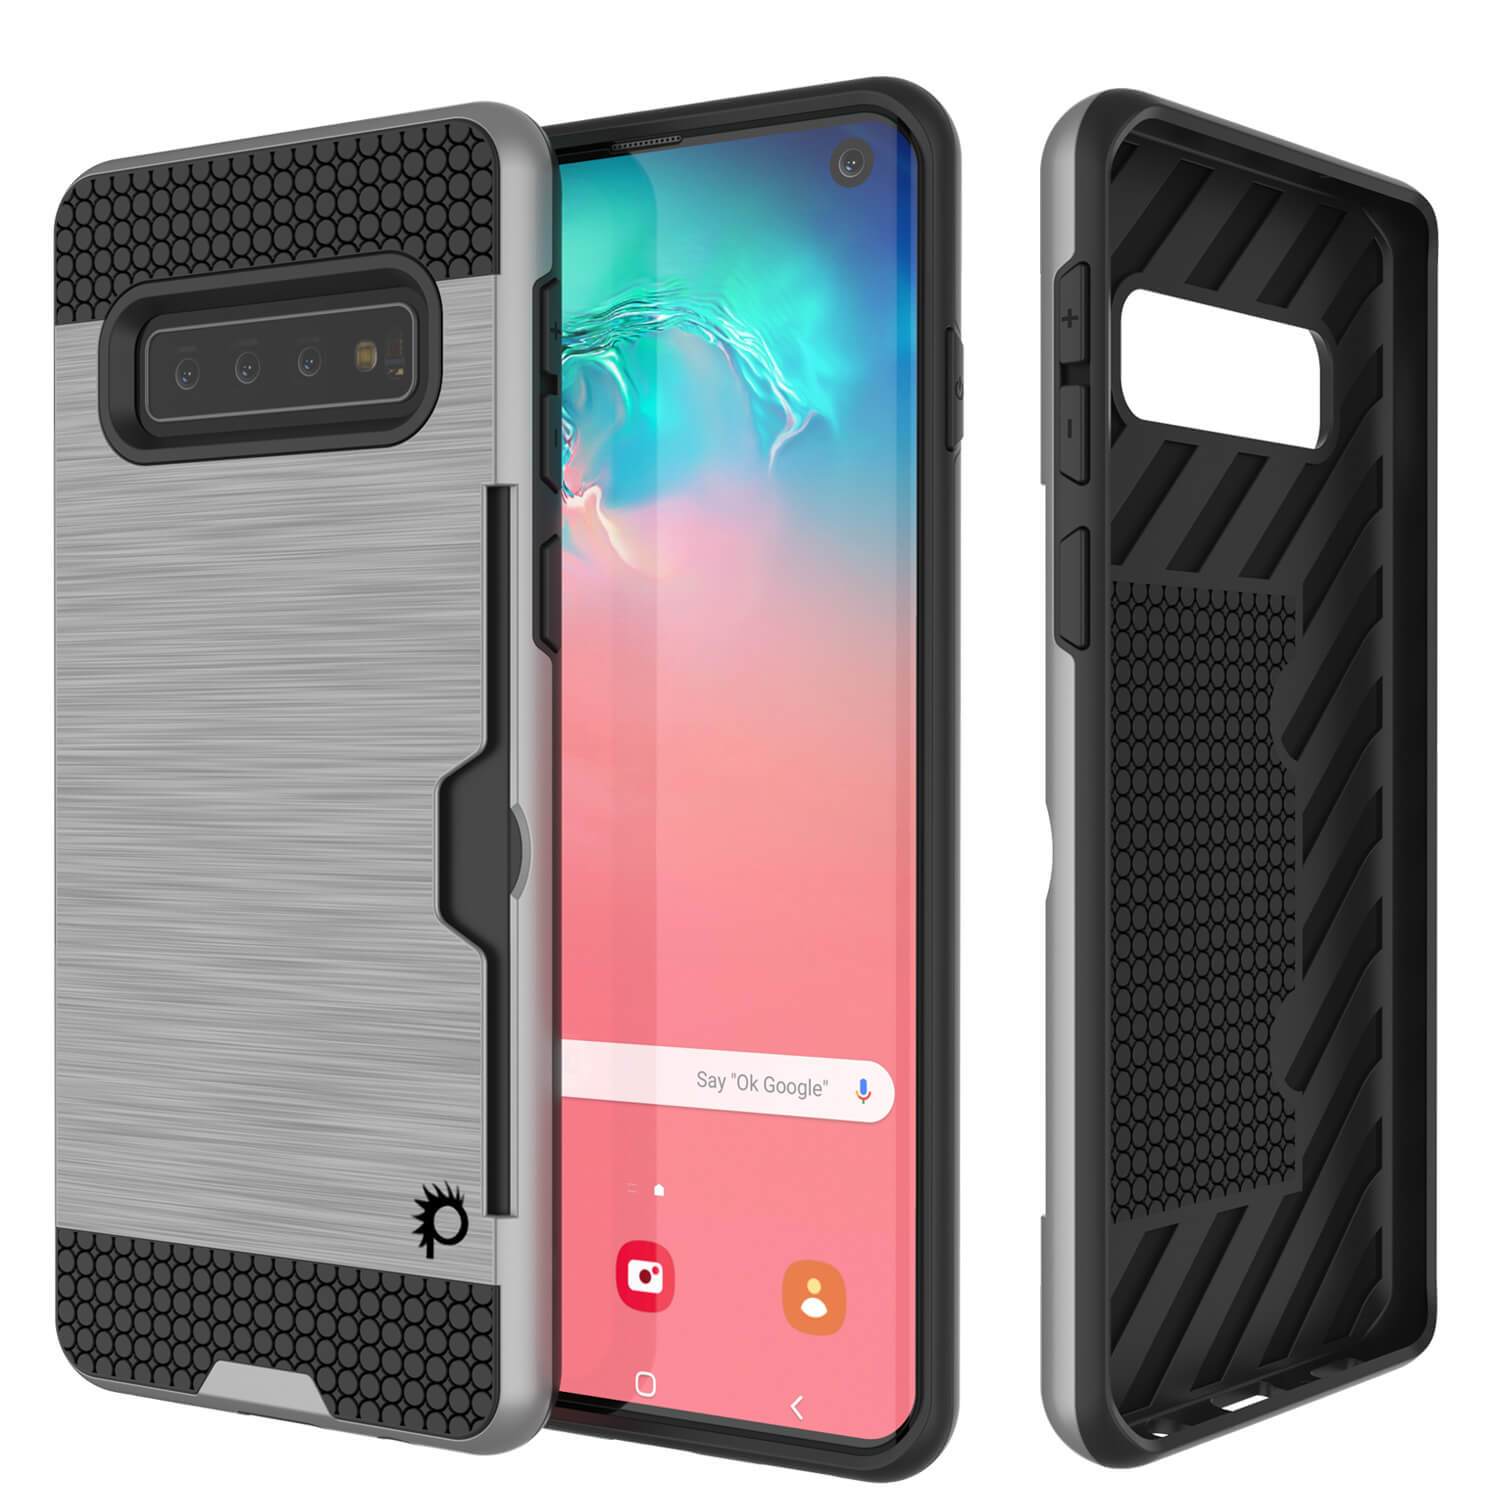 Galaxy S10 Case, PUNKcase [SLOT Series] [Slim Fit] Dual-Layer Armor Cover w/Integrated Anti-Shock System, Credit Card Slot [Silver]